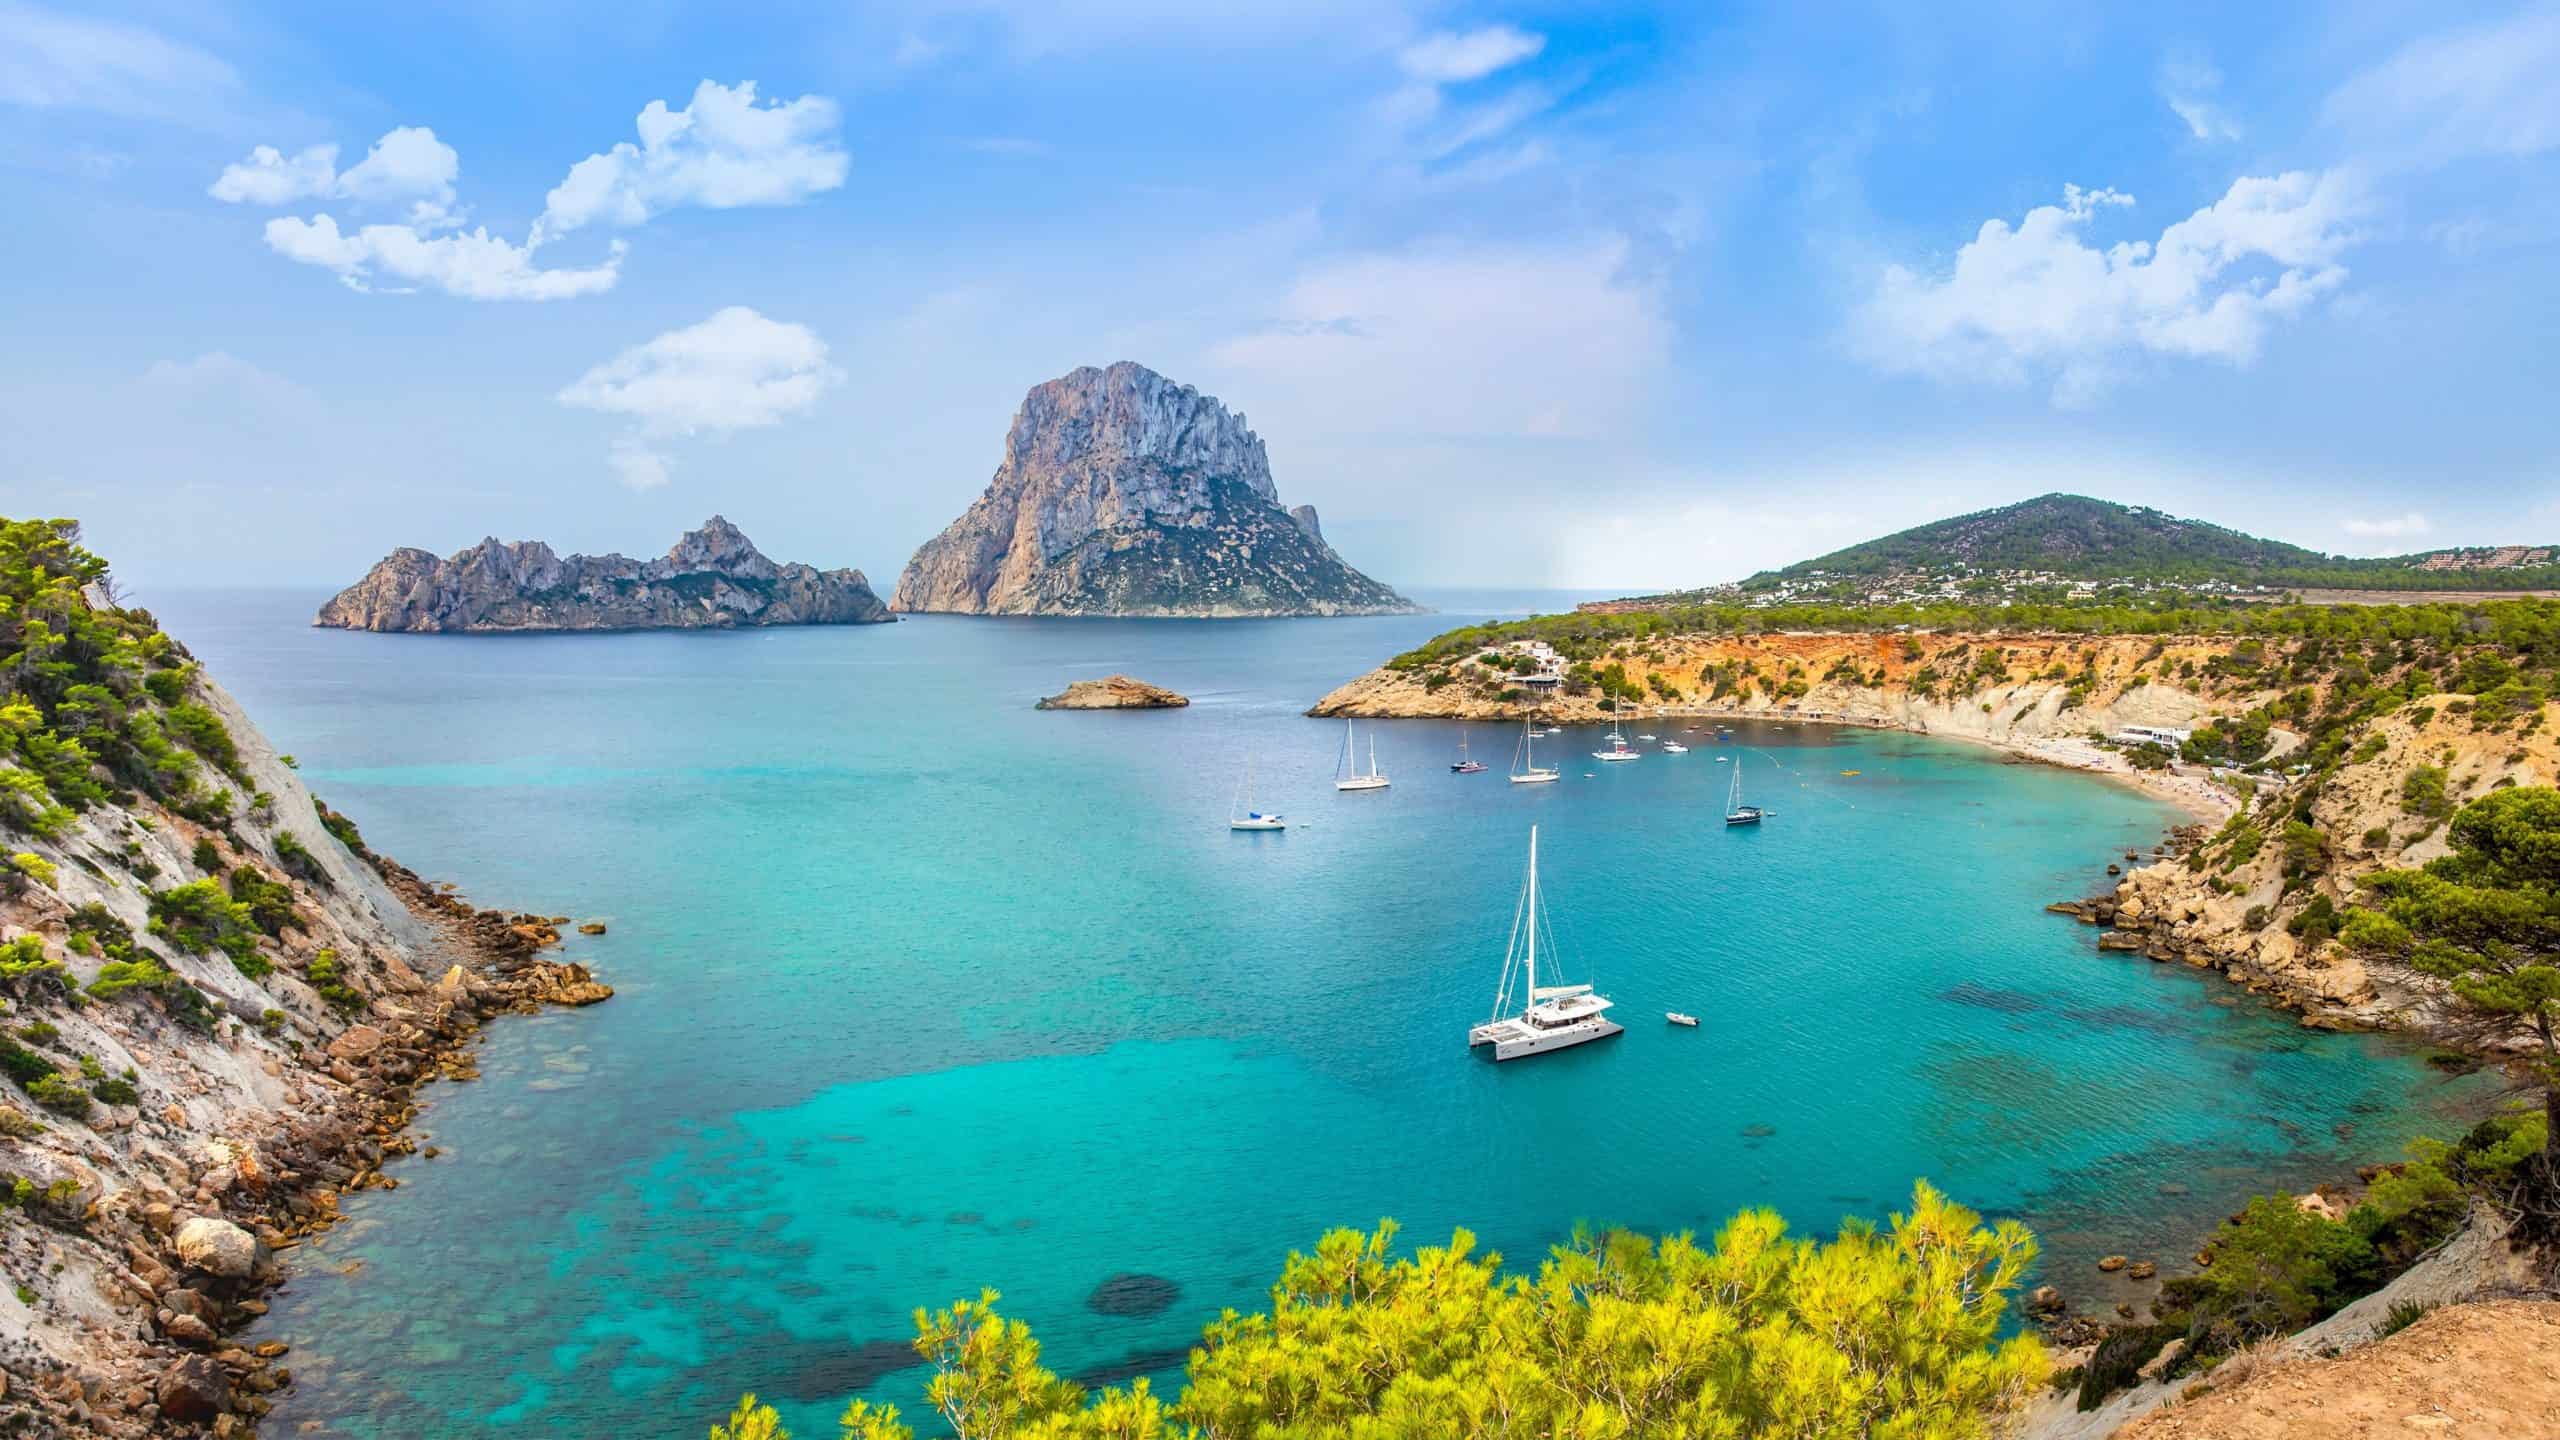 Picture of the gorgeous Ibiza(located in spain) landscape. Which shows mountains, crystal clear waters and boats